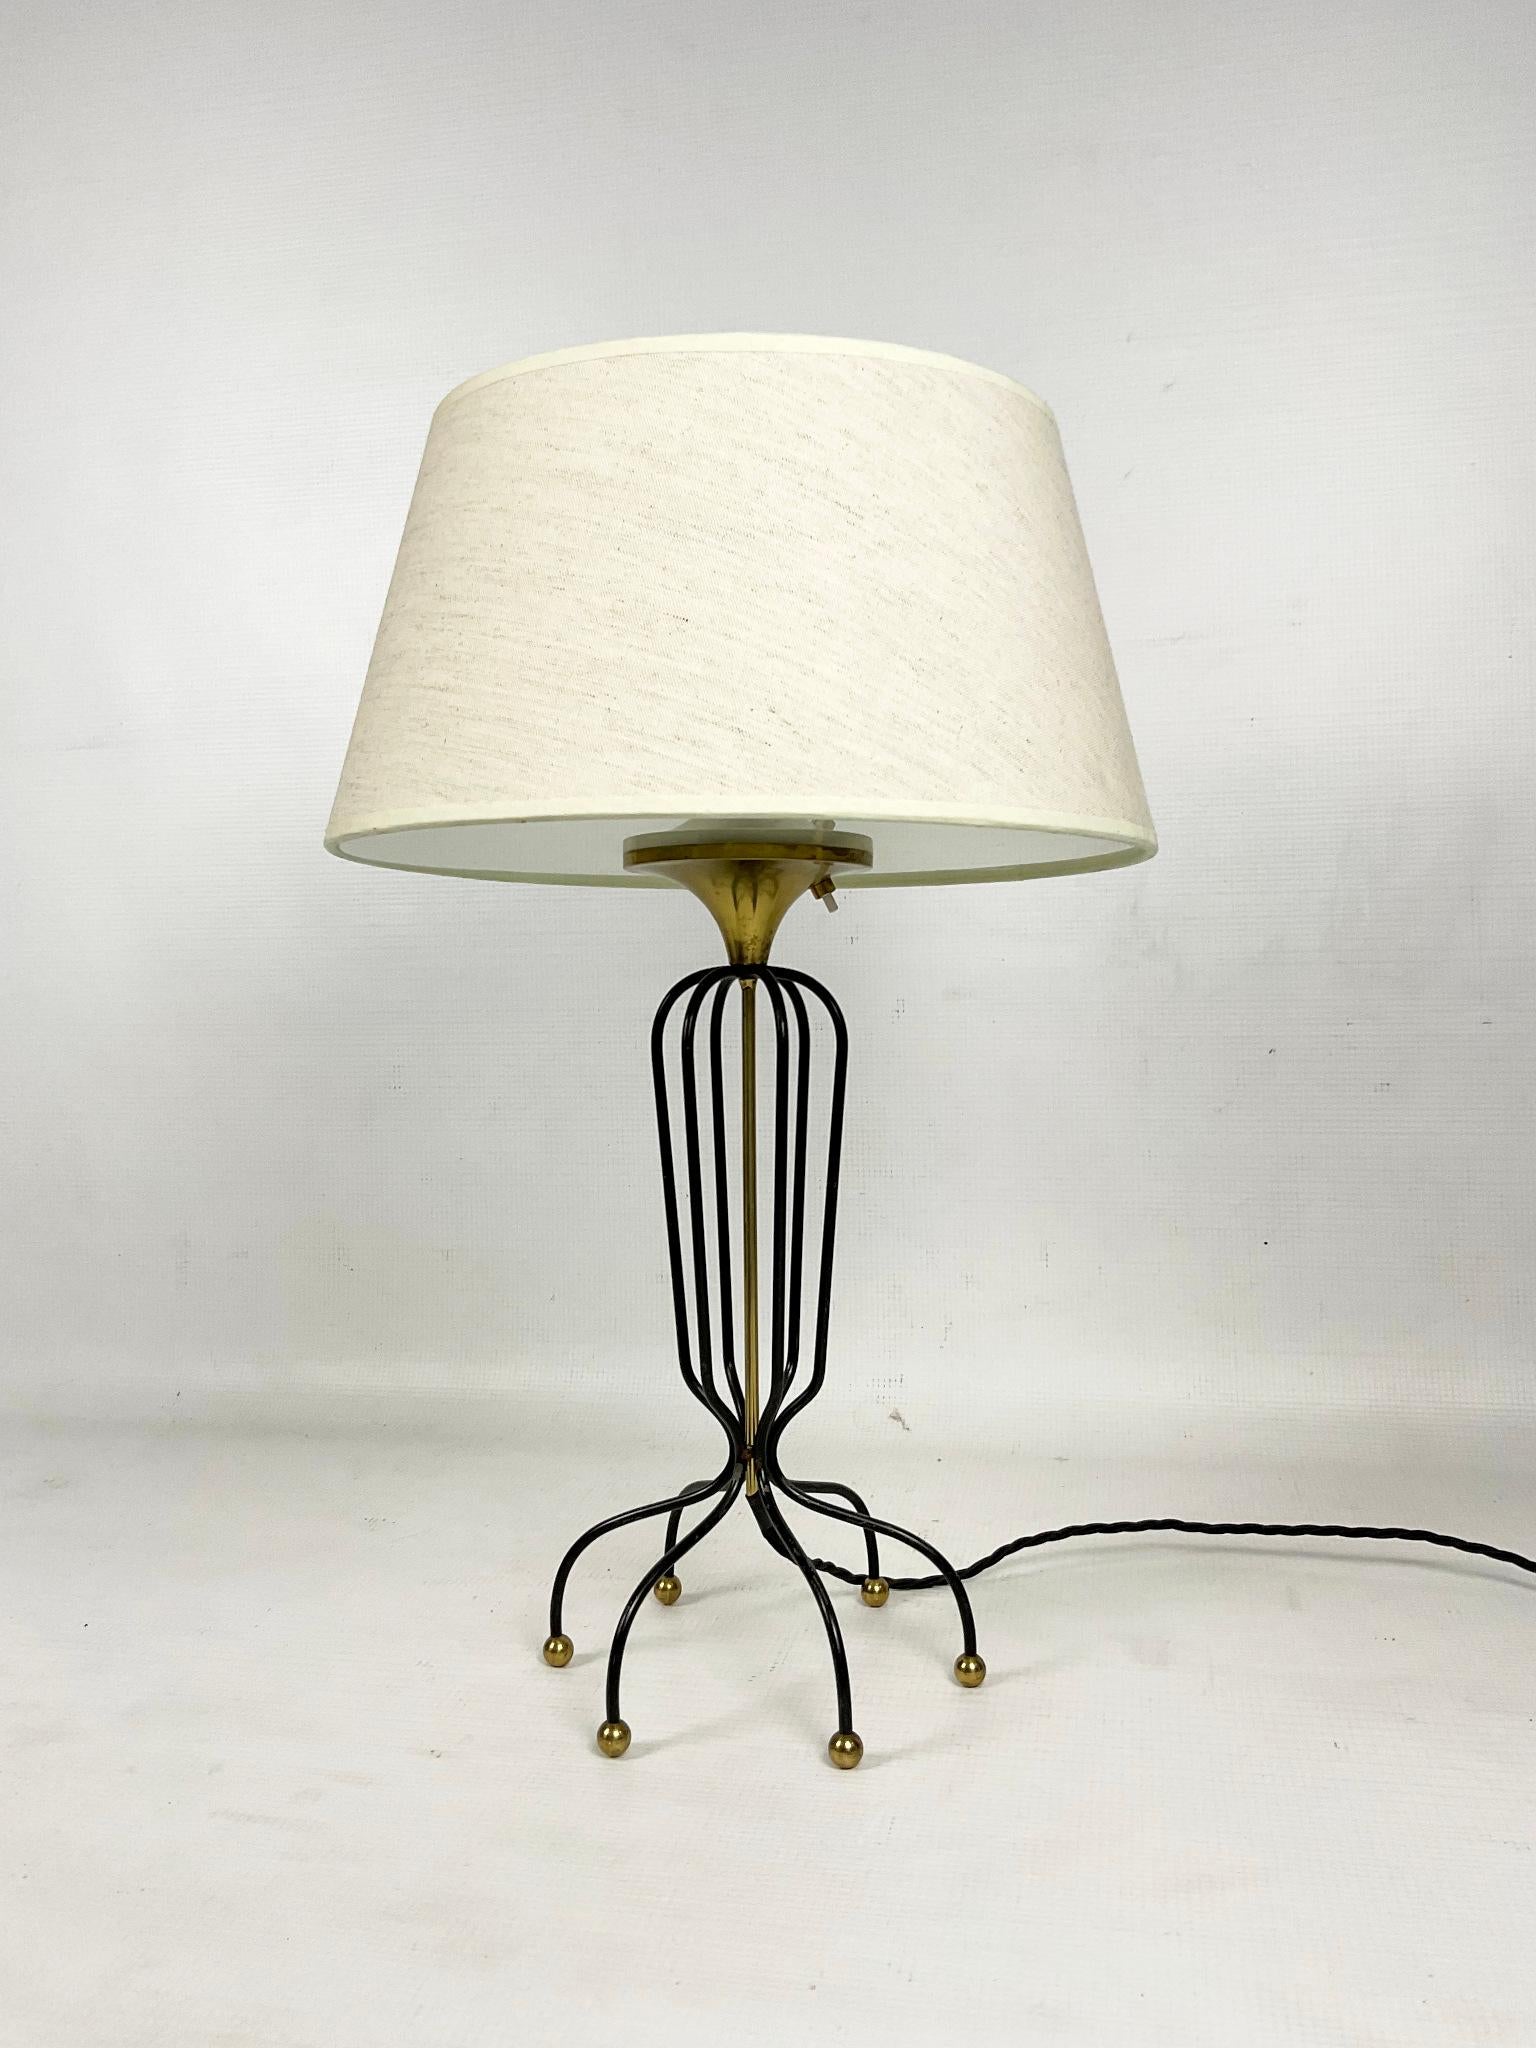 This rare 1950s table lamp was manufactured and produced by Maison Arlus France.
The lamp is composed of a thin brass column surrounded by black metal rods forming the body of the lamp, with an octopus-shaped lamp base, ending in polished brass